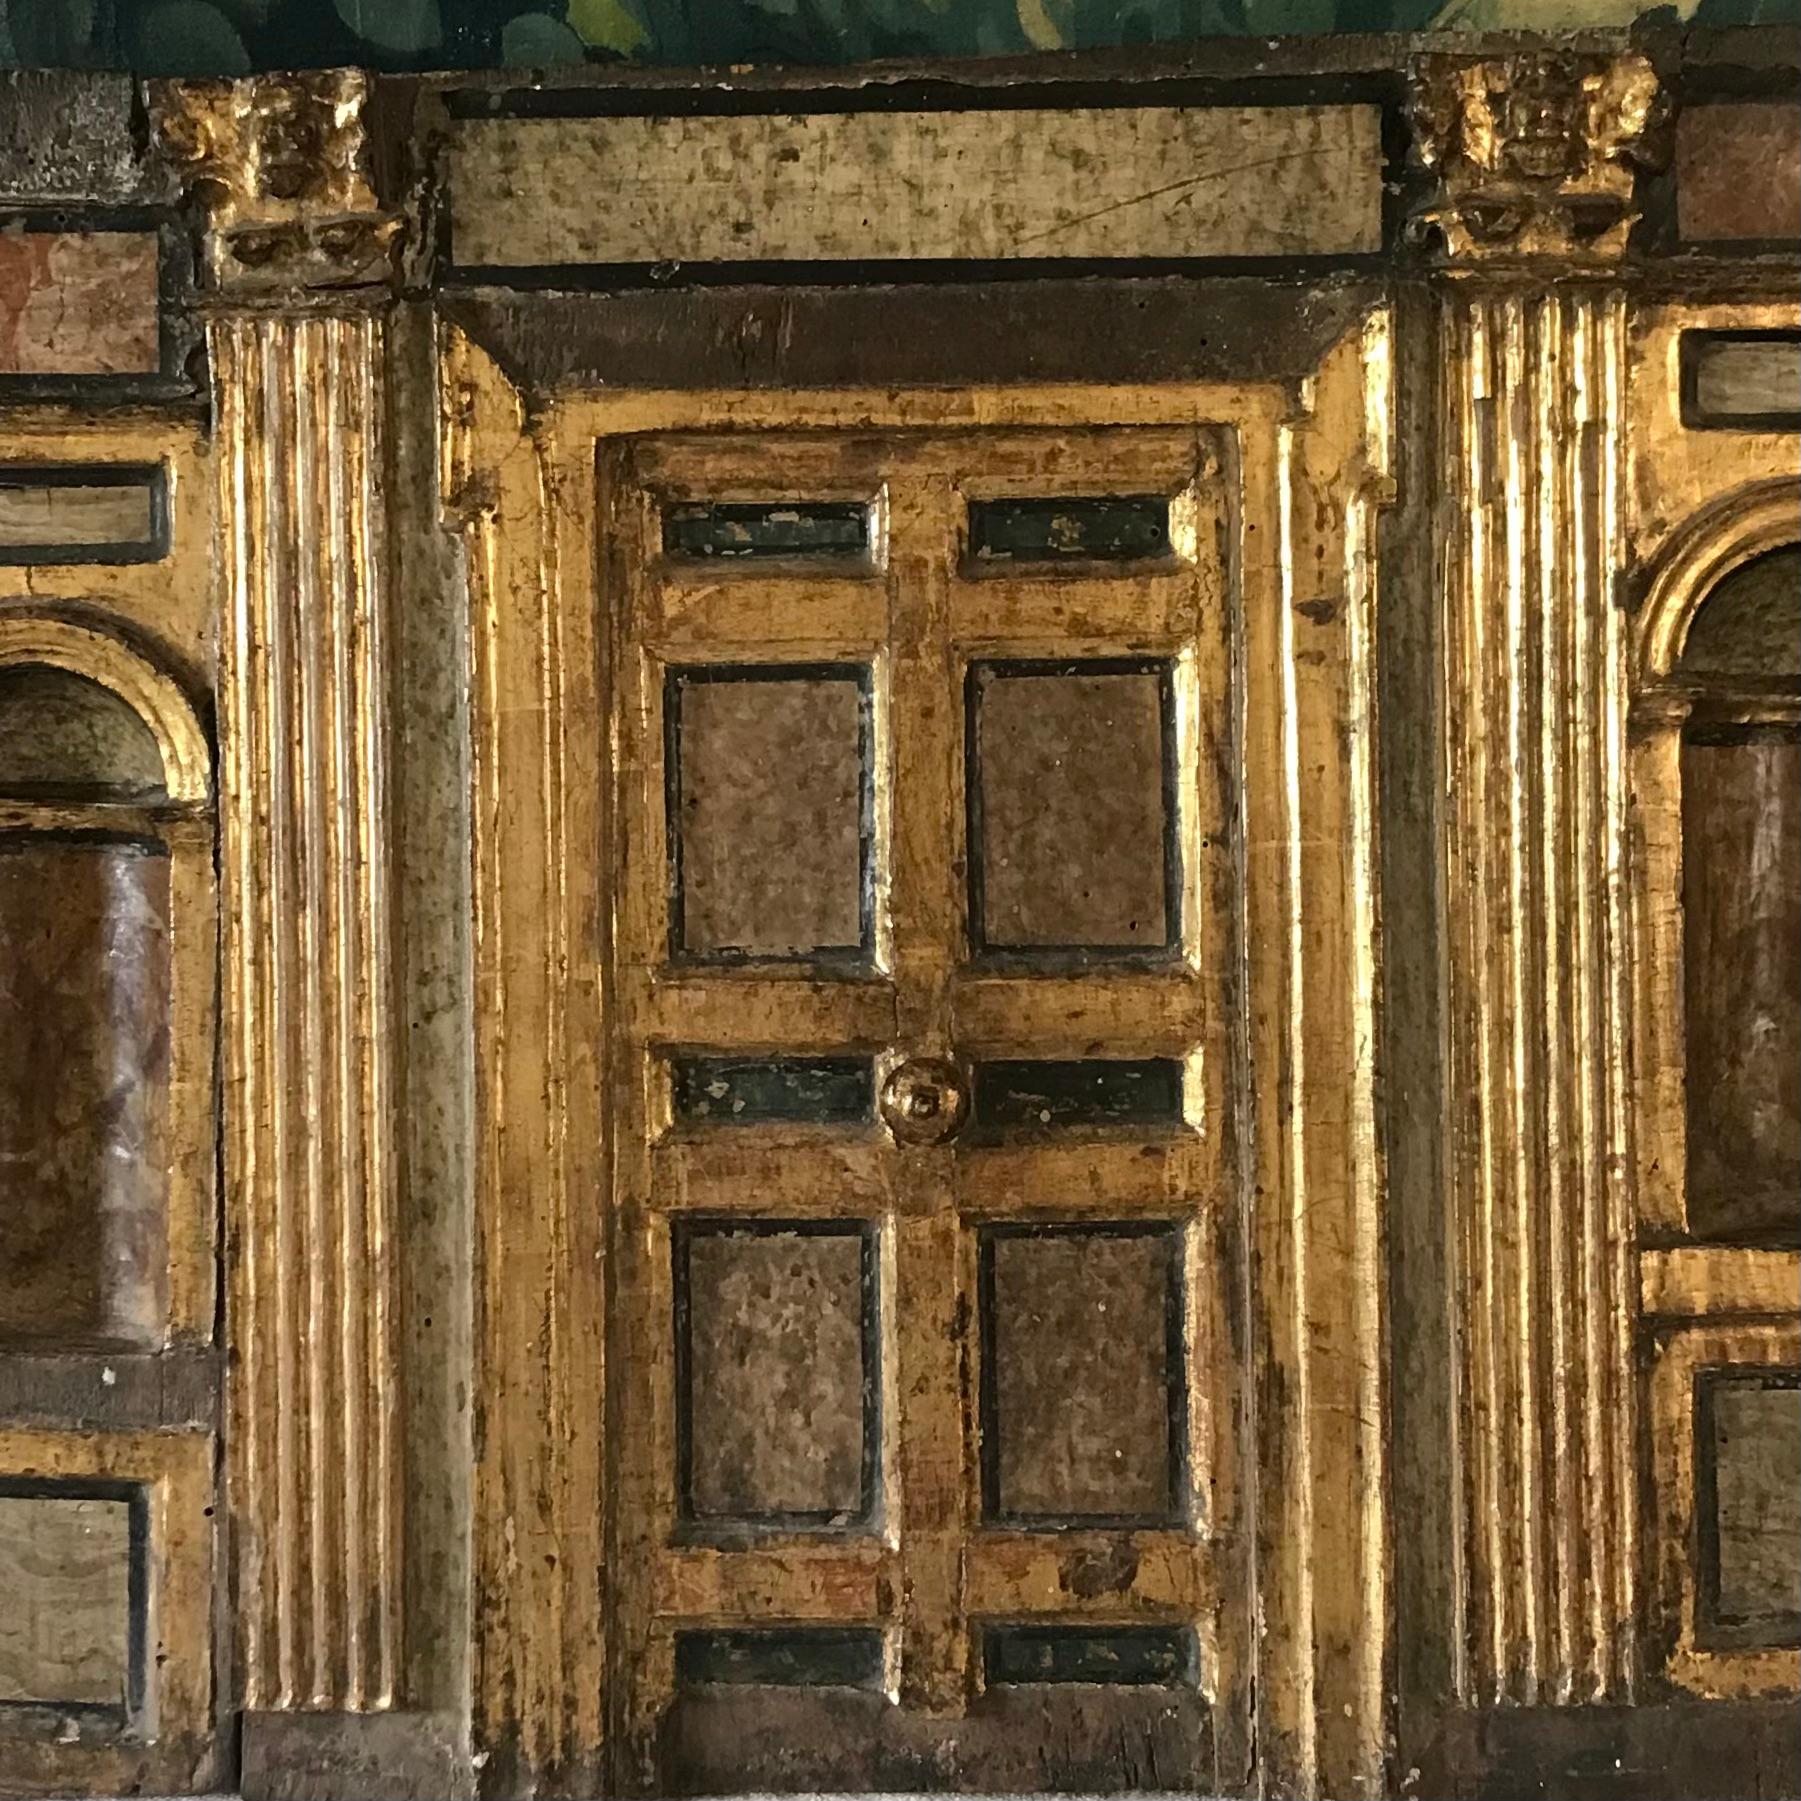 A late 18th century Italian architectural wood carving - hand carved painted and gilded wood - depicting a  facade of a building - an ornate door with deep recesses either side of the door in a hand marbled painted finish and gilded Corinthian